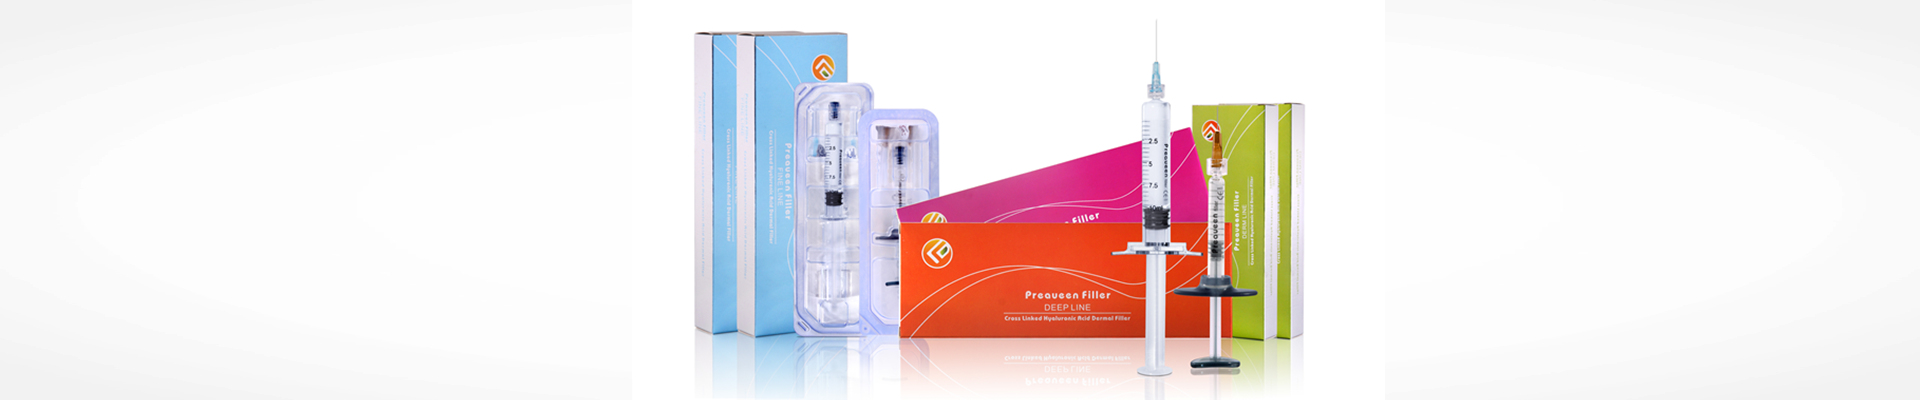 Wholesale Preaueen dermal Fillers with great performance